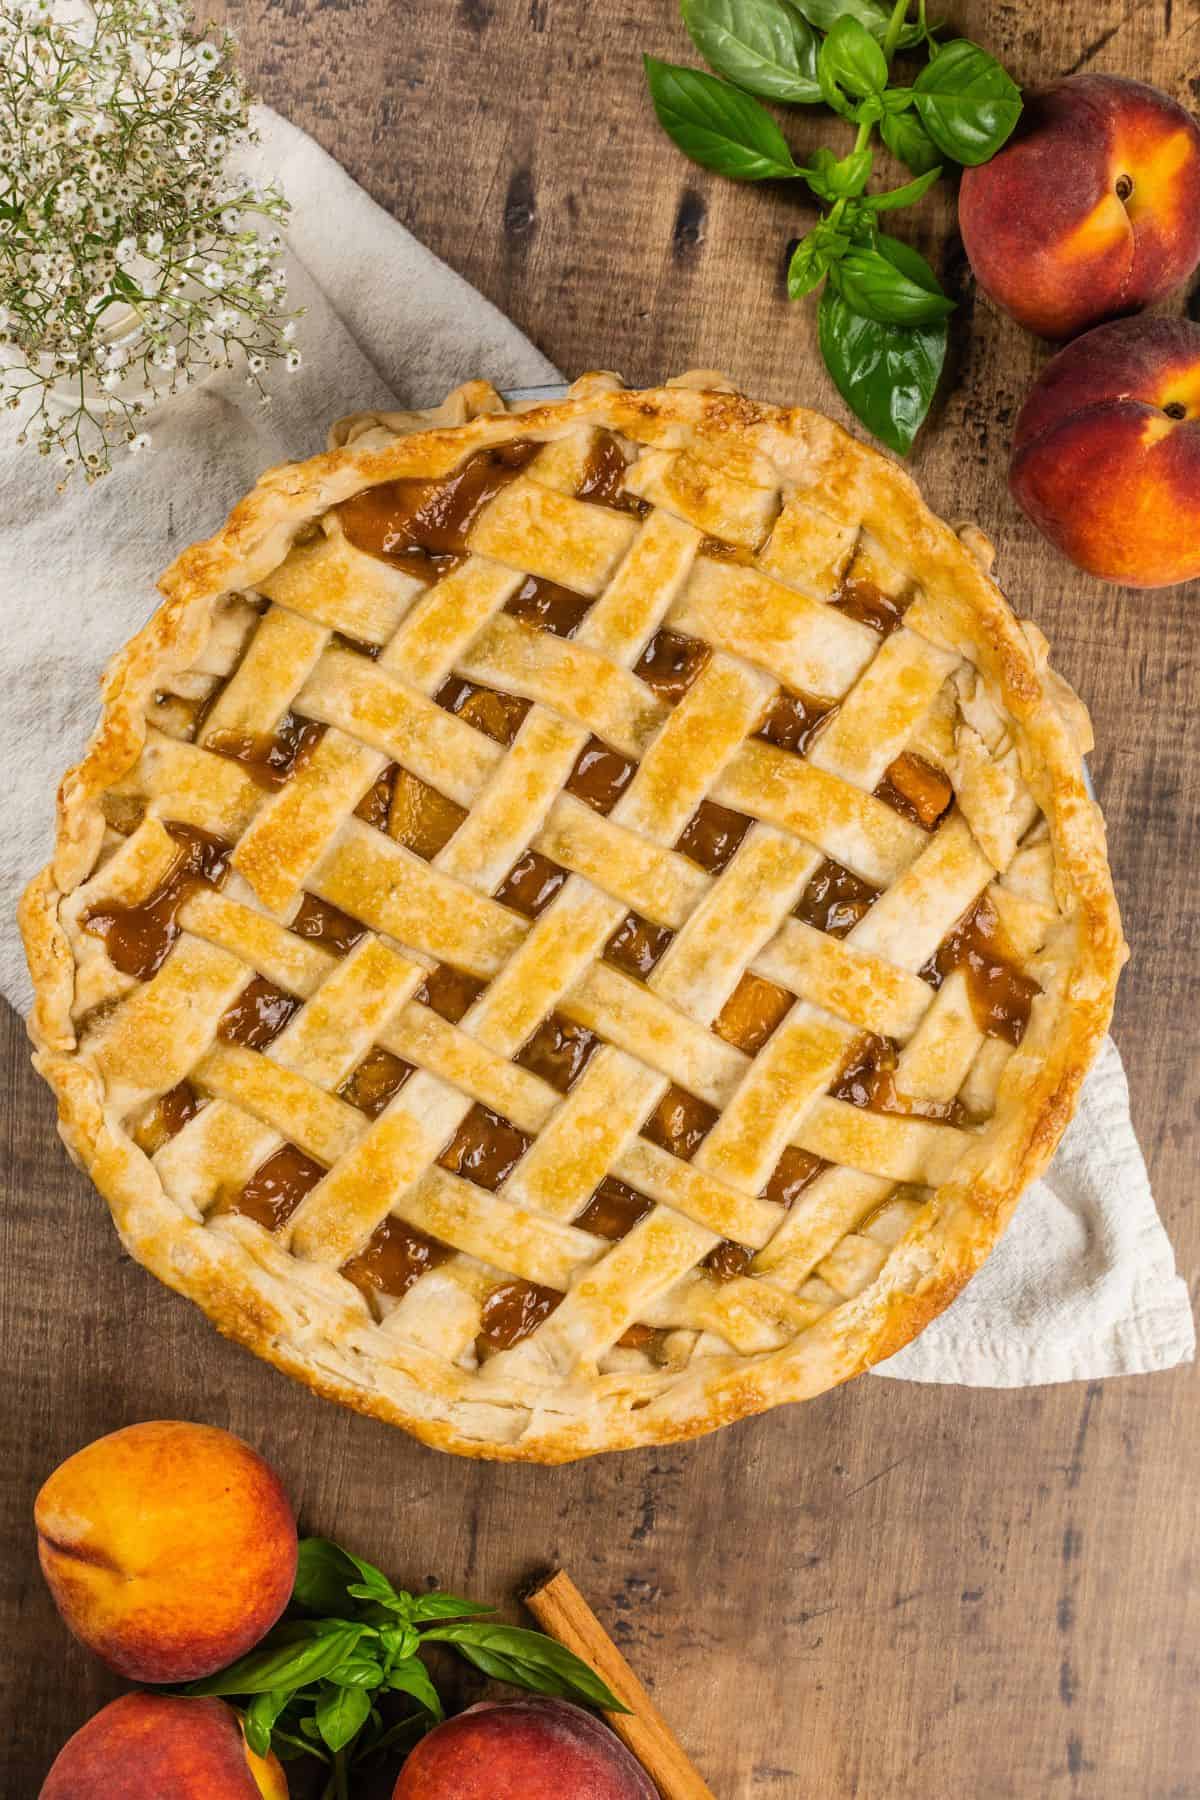 finished peach pie with a lattice crust surrounded by peaches and herbs on a wood table